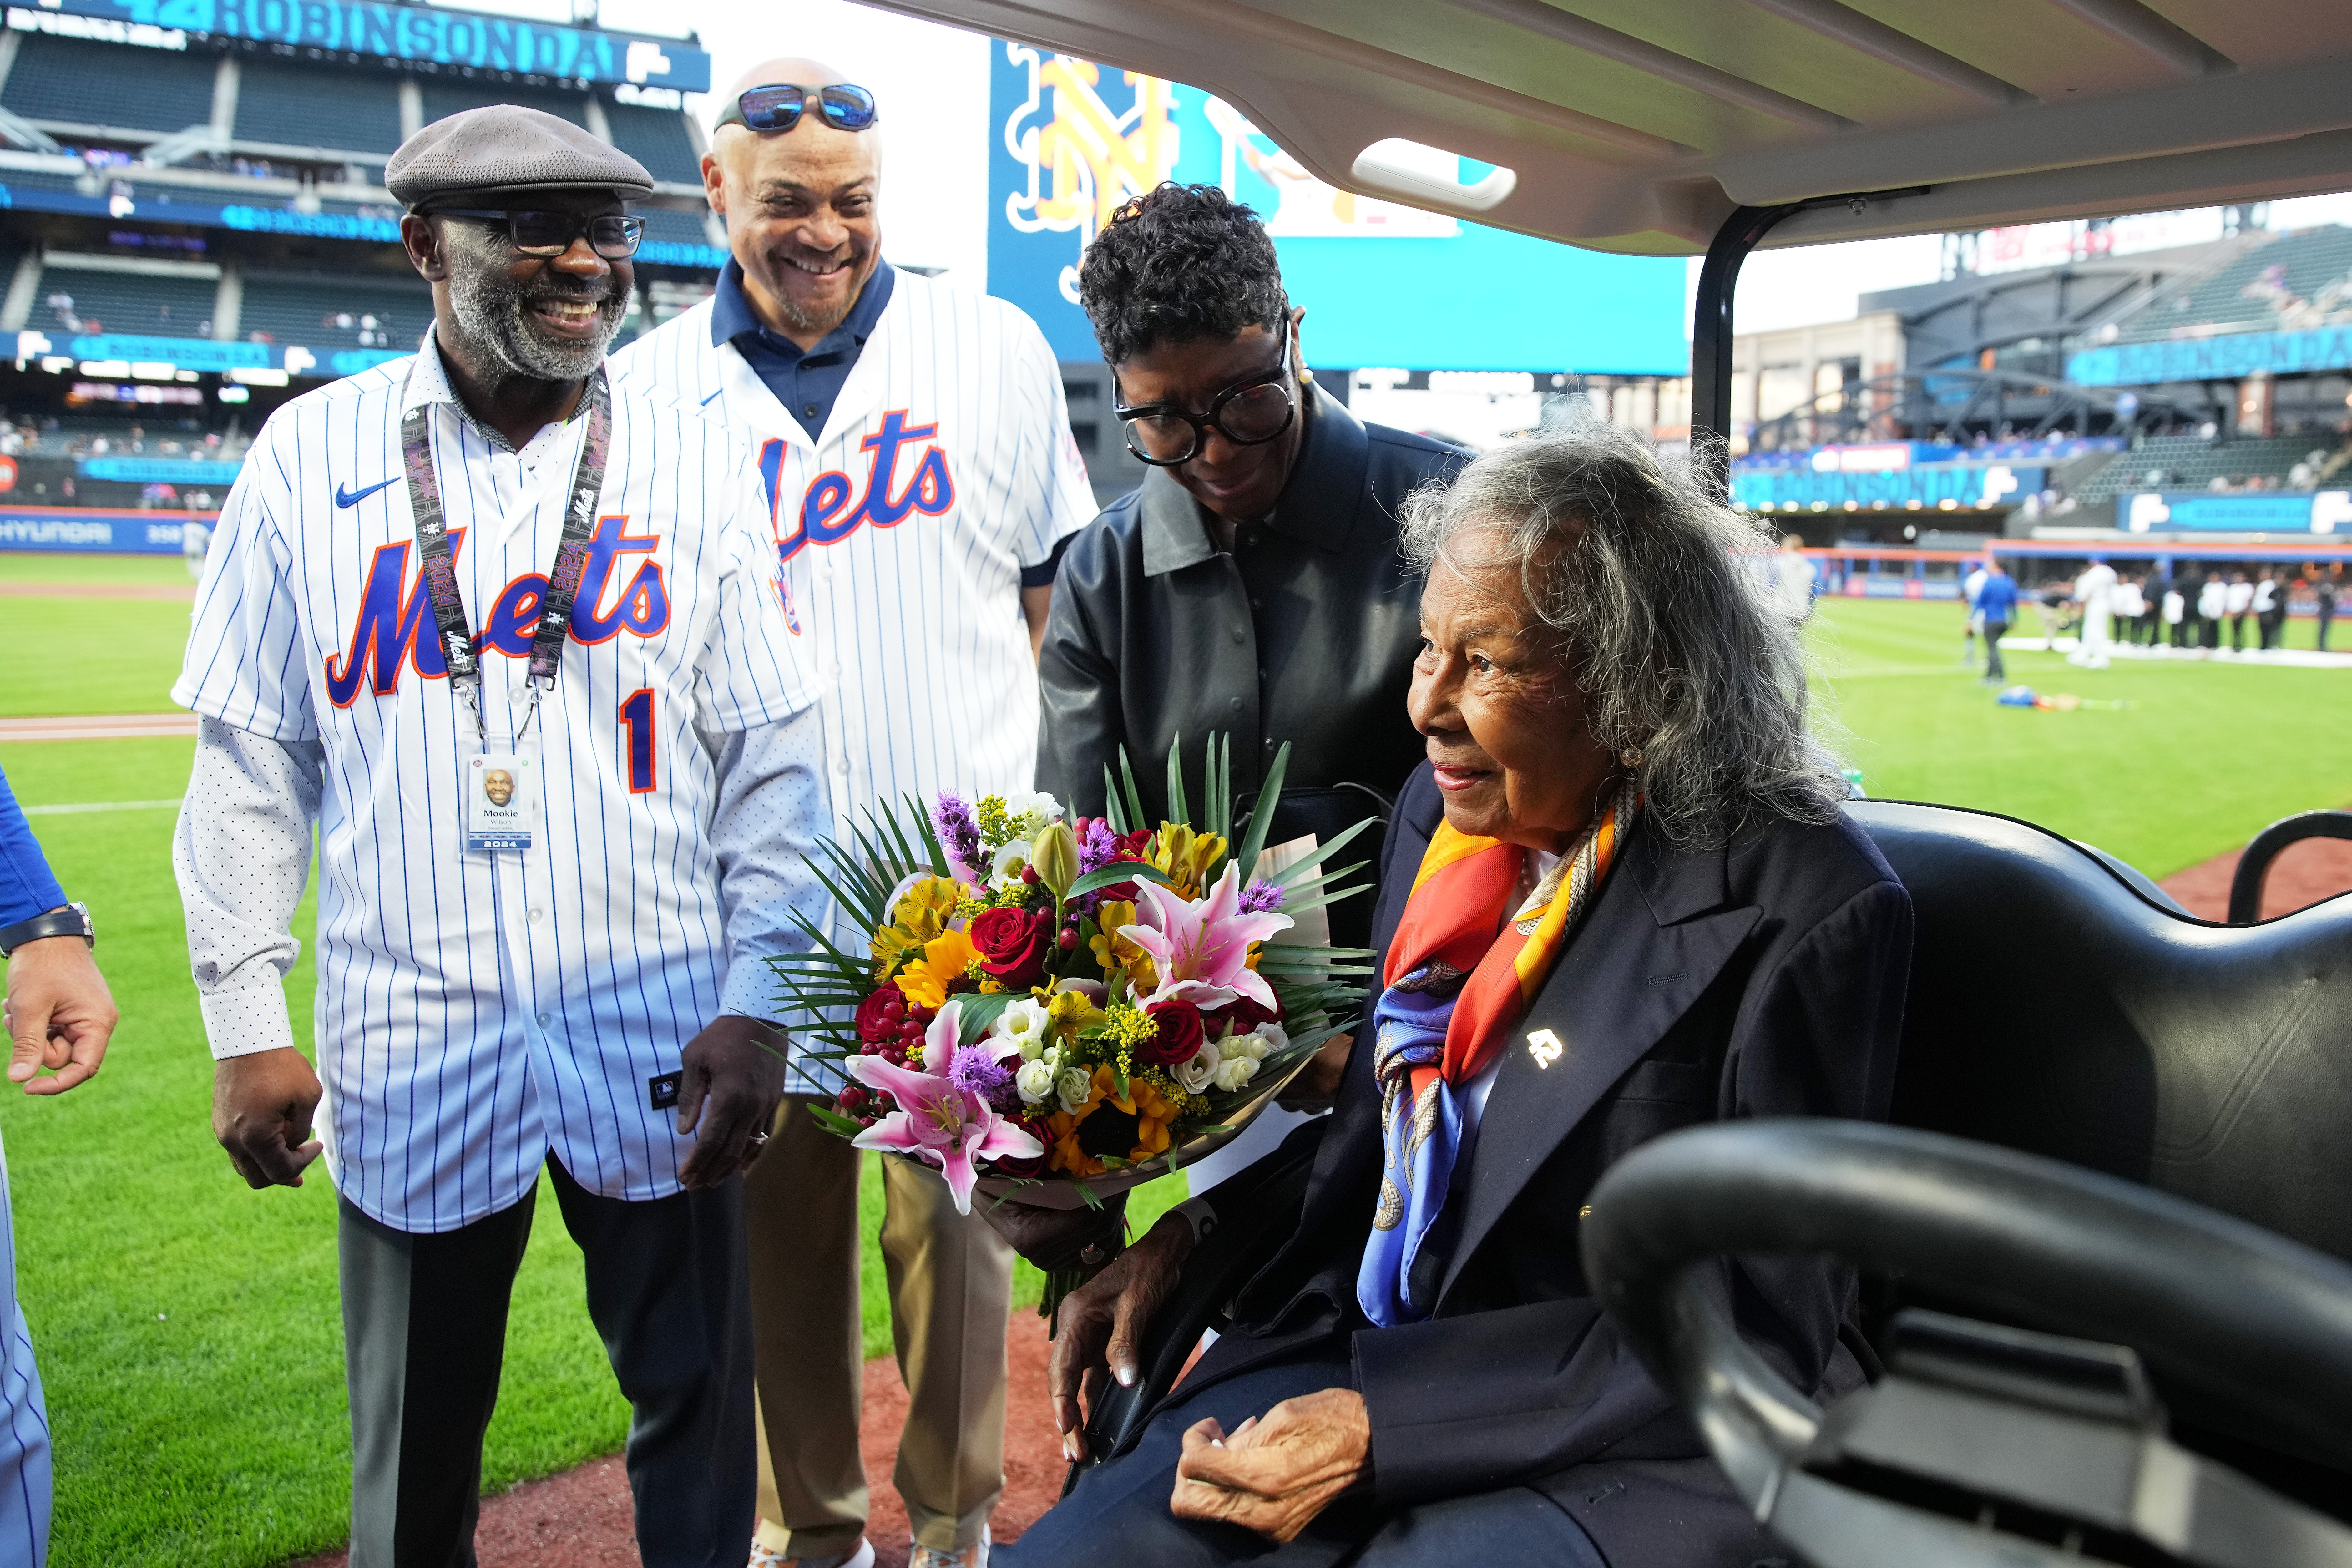 Rachel Robinson, Jackie Robinson's 101-year-old widow, joins Mets for
ceremony at Citi Field